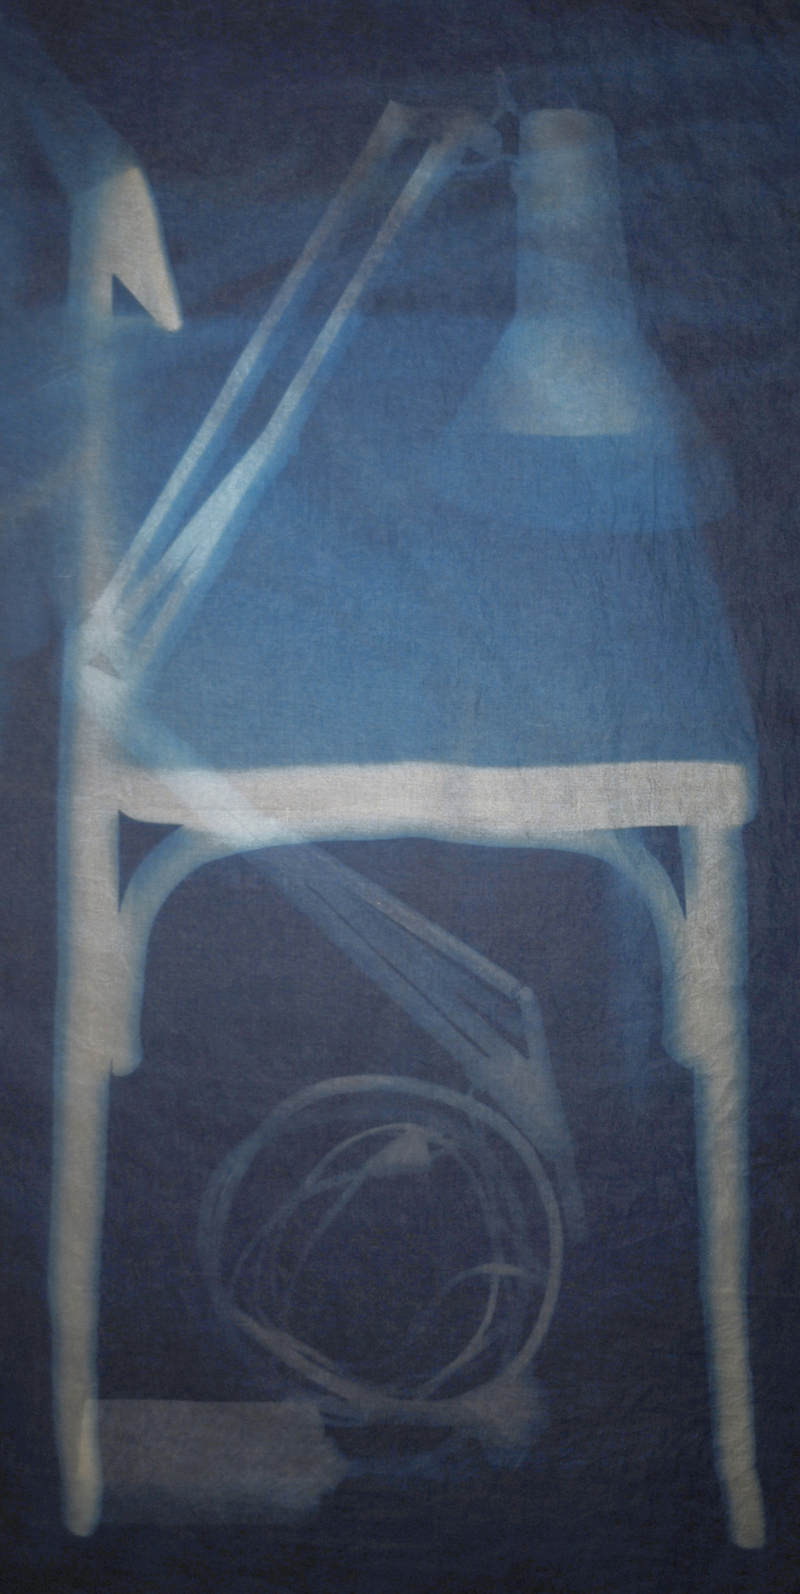 Leslie Hirst Objectively Speaking cyanotype on silk